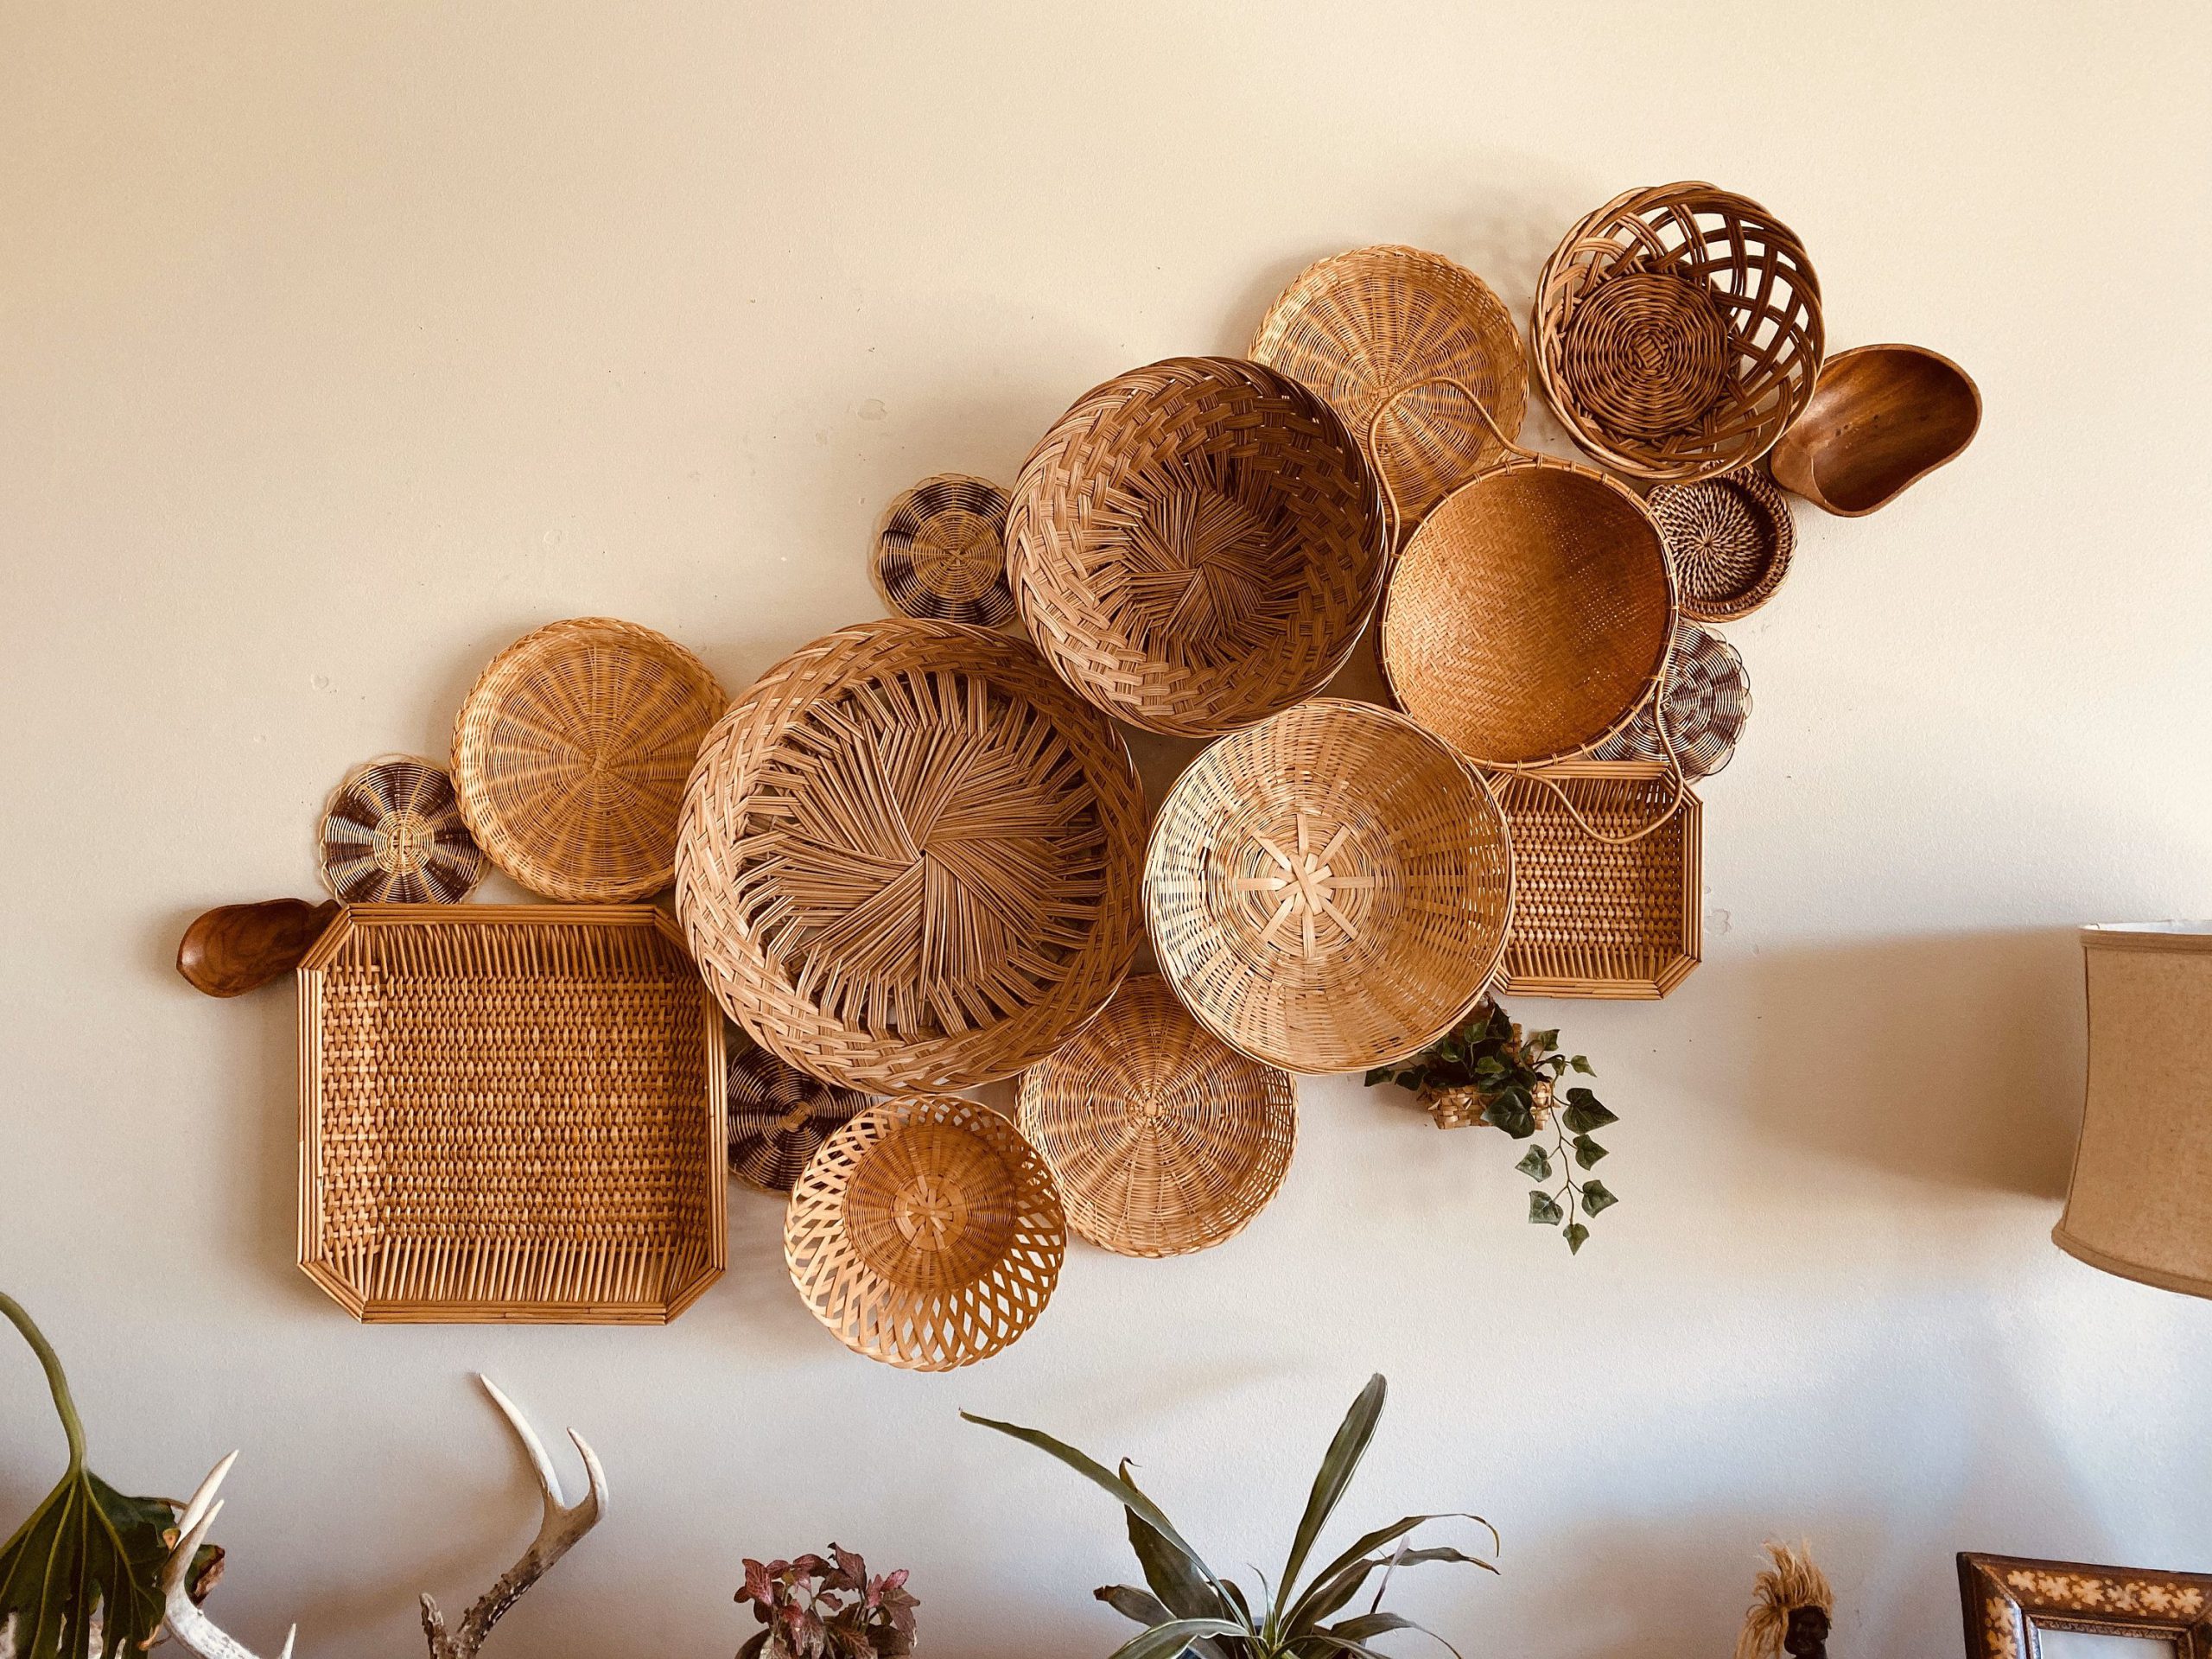 Bohemian Style with Basket